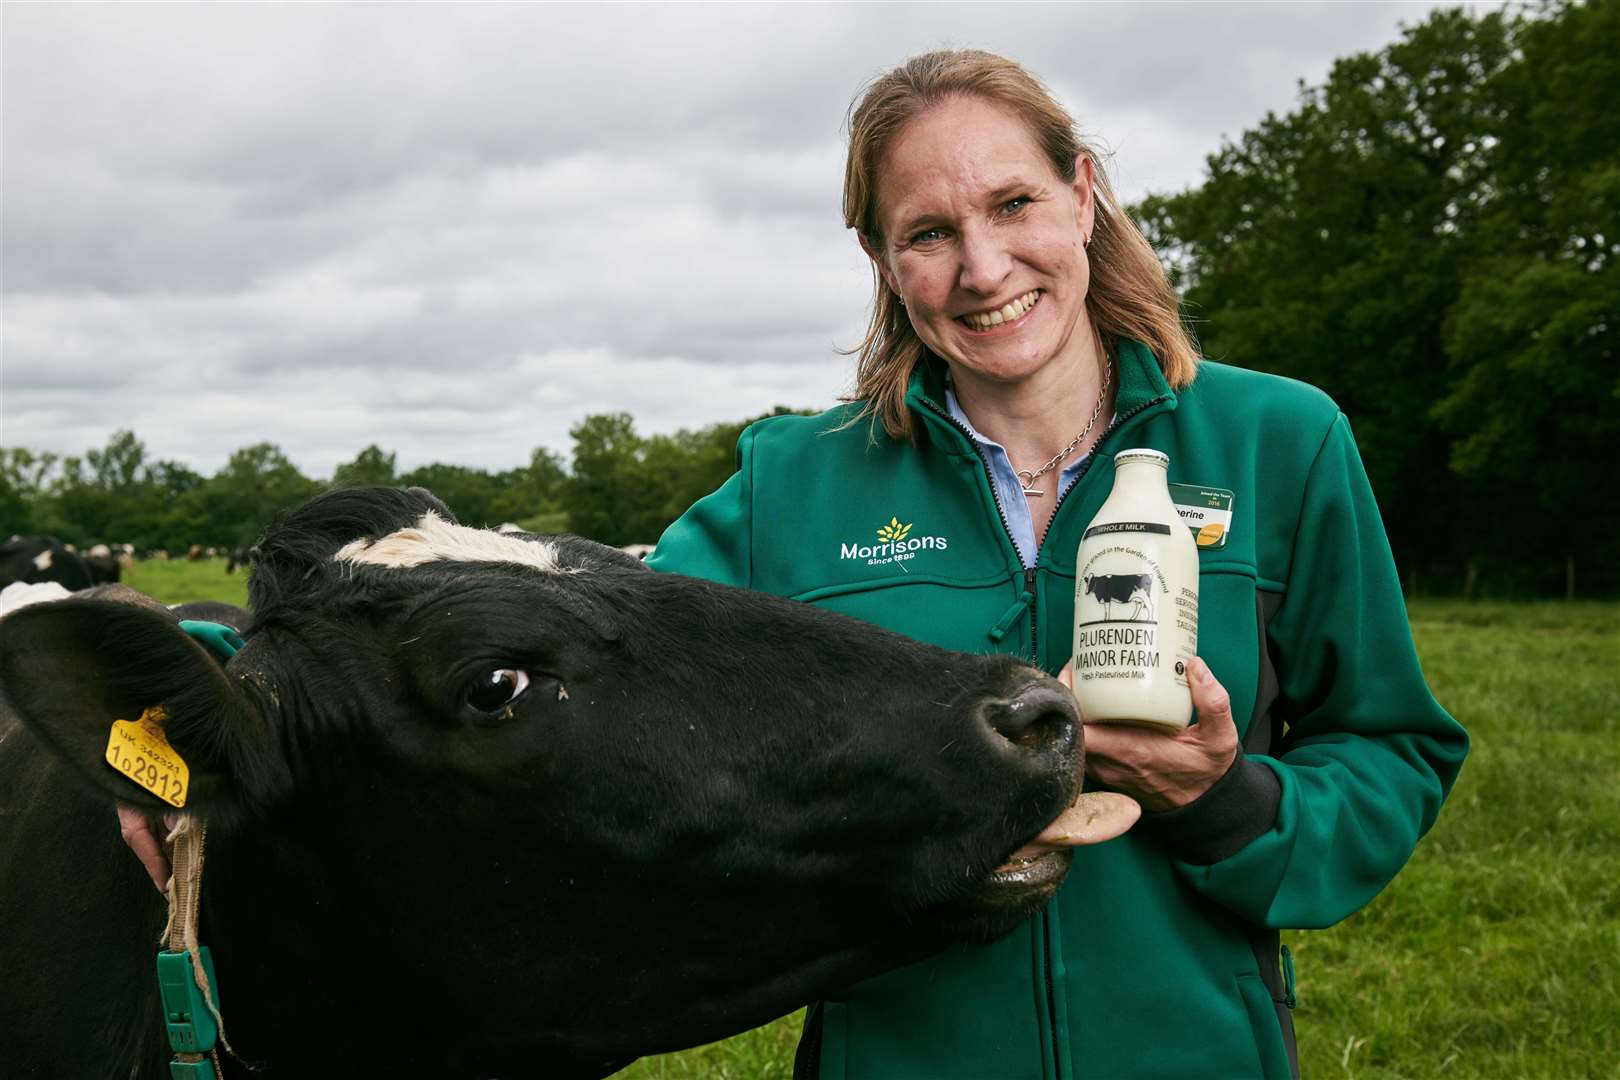 Morrisons hopes to roll the scheme out further as it speaks to more dairy farms